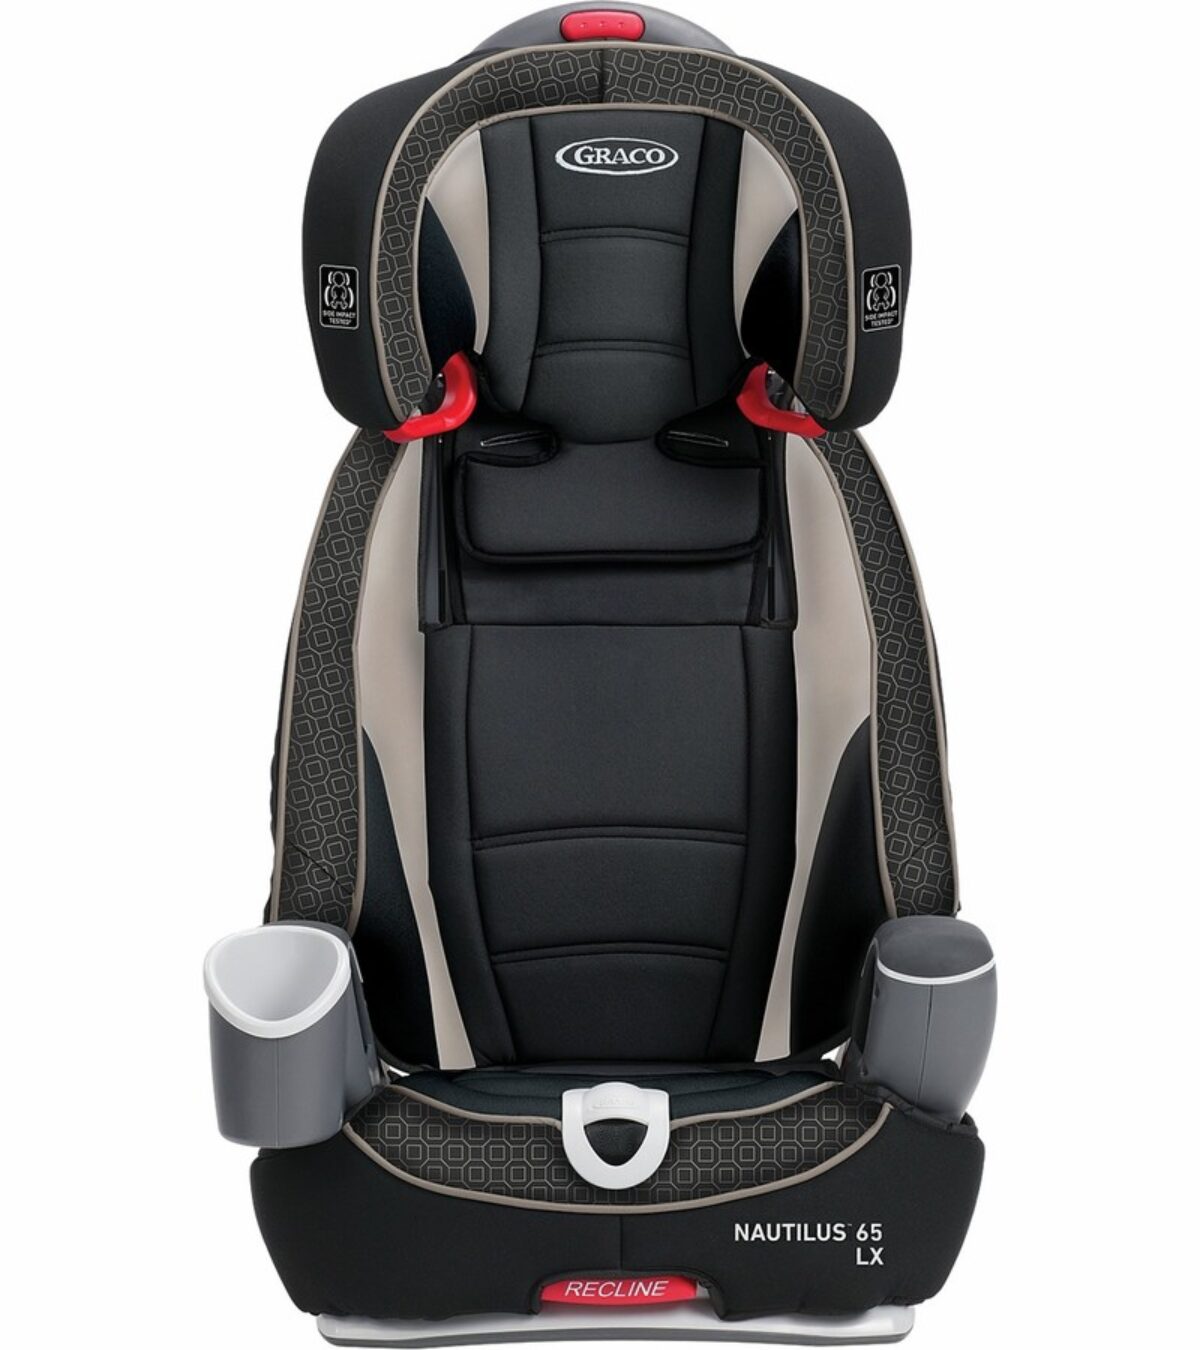 Graco Nautilus 65 Lx 3 In 1 Car Seat Review By An Actual Mom - How To Install Graco Nautilus Car Seat With Seatbelt